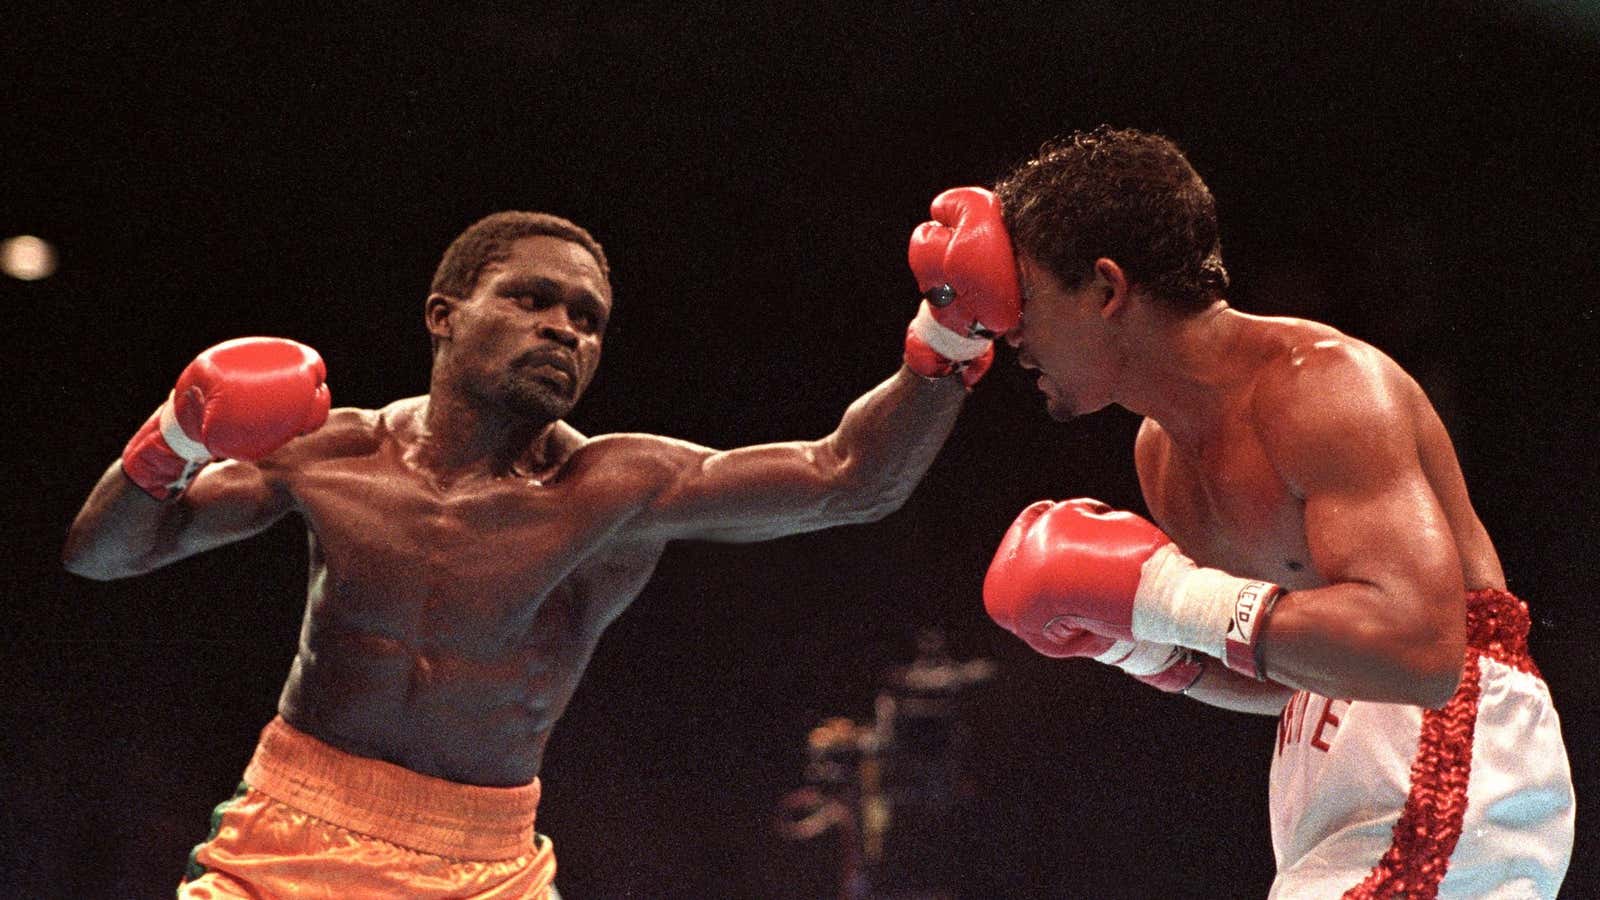 Ghana’s Azumah Nelson, from Jamestown, Accra, lands a jab to the face of Puerto Rico’s Juan LaPorte during a super-featherweight WBC title fight in 1990 in Sydney.